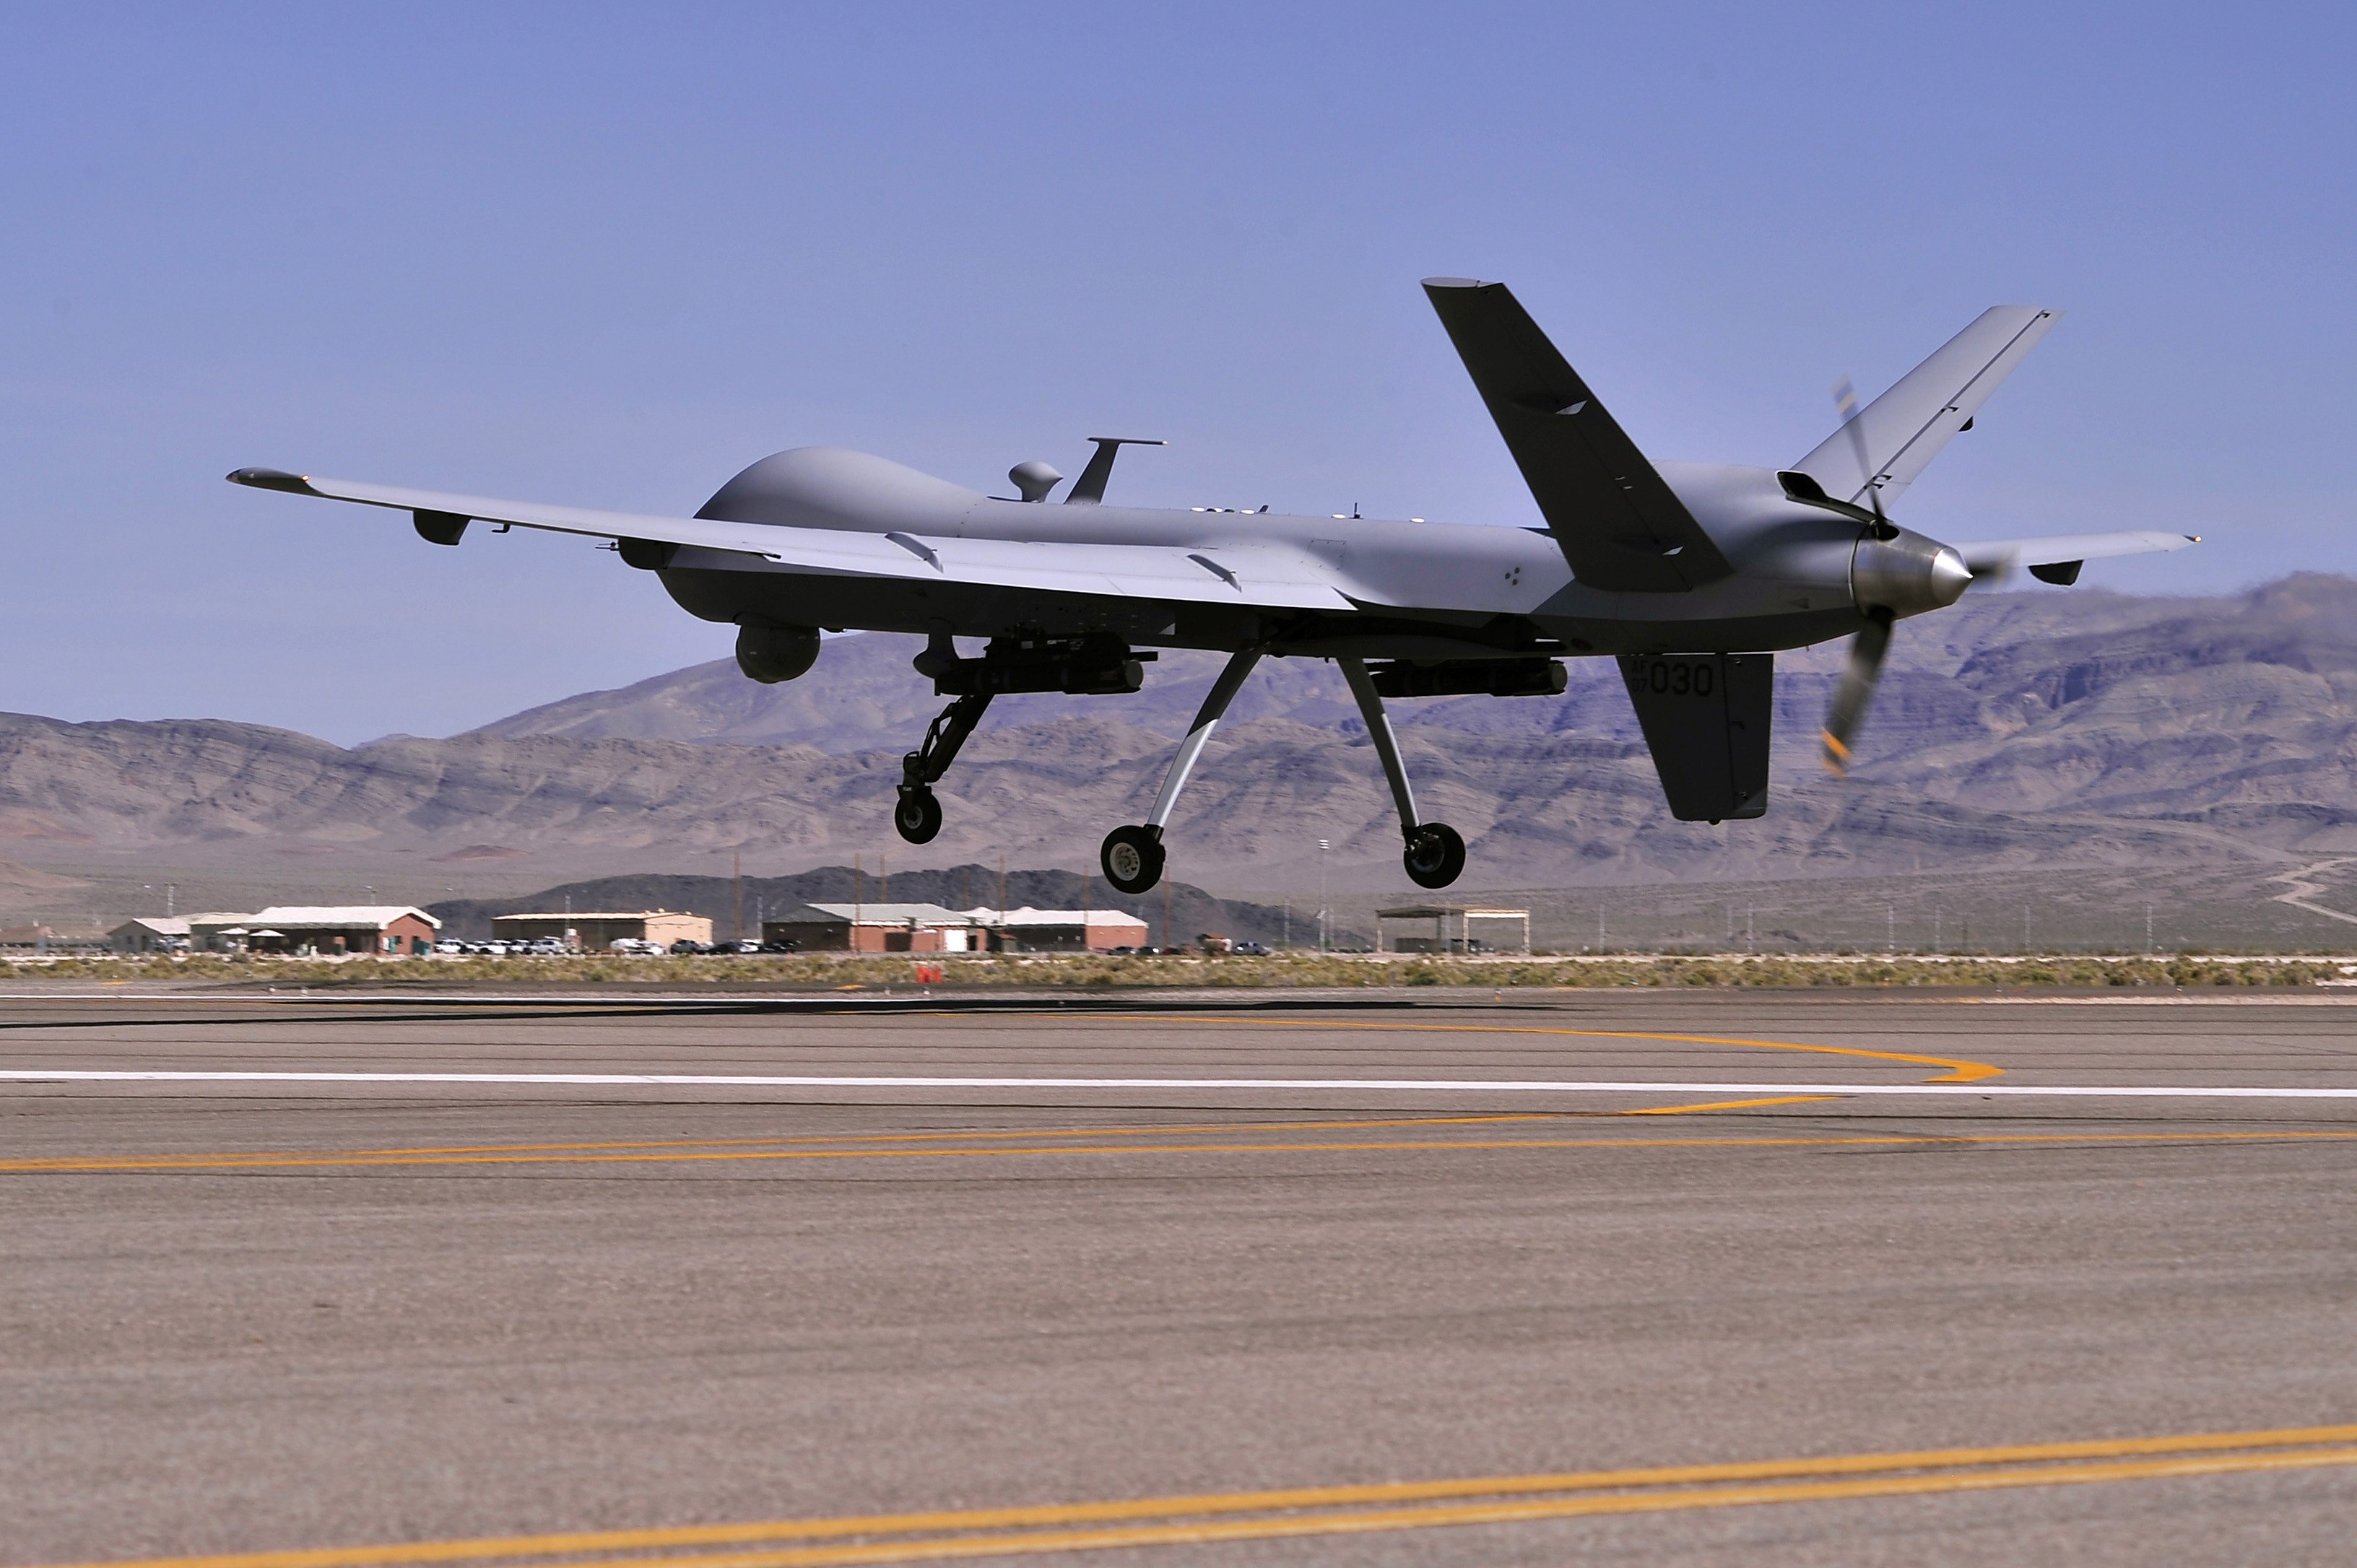 An MQ-9 Reaper drone takes off on a training mission at an air force base in Nevada, US. Photo: EPA-EFE/US air force